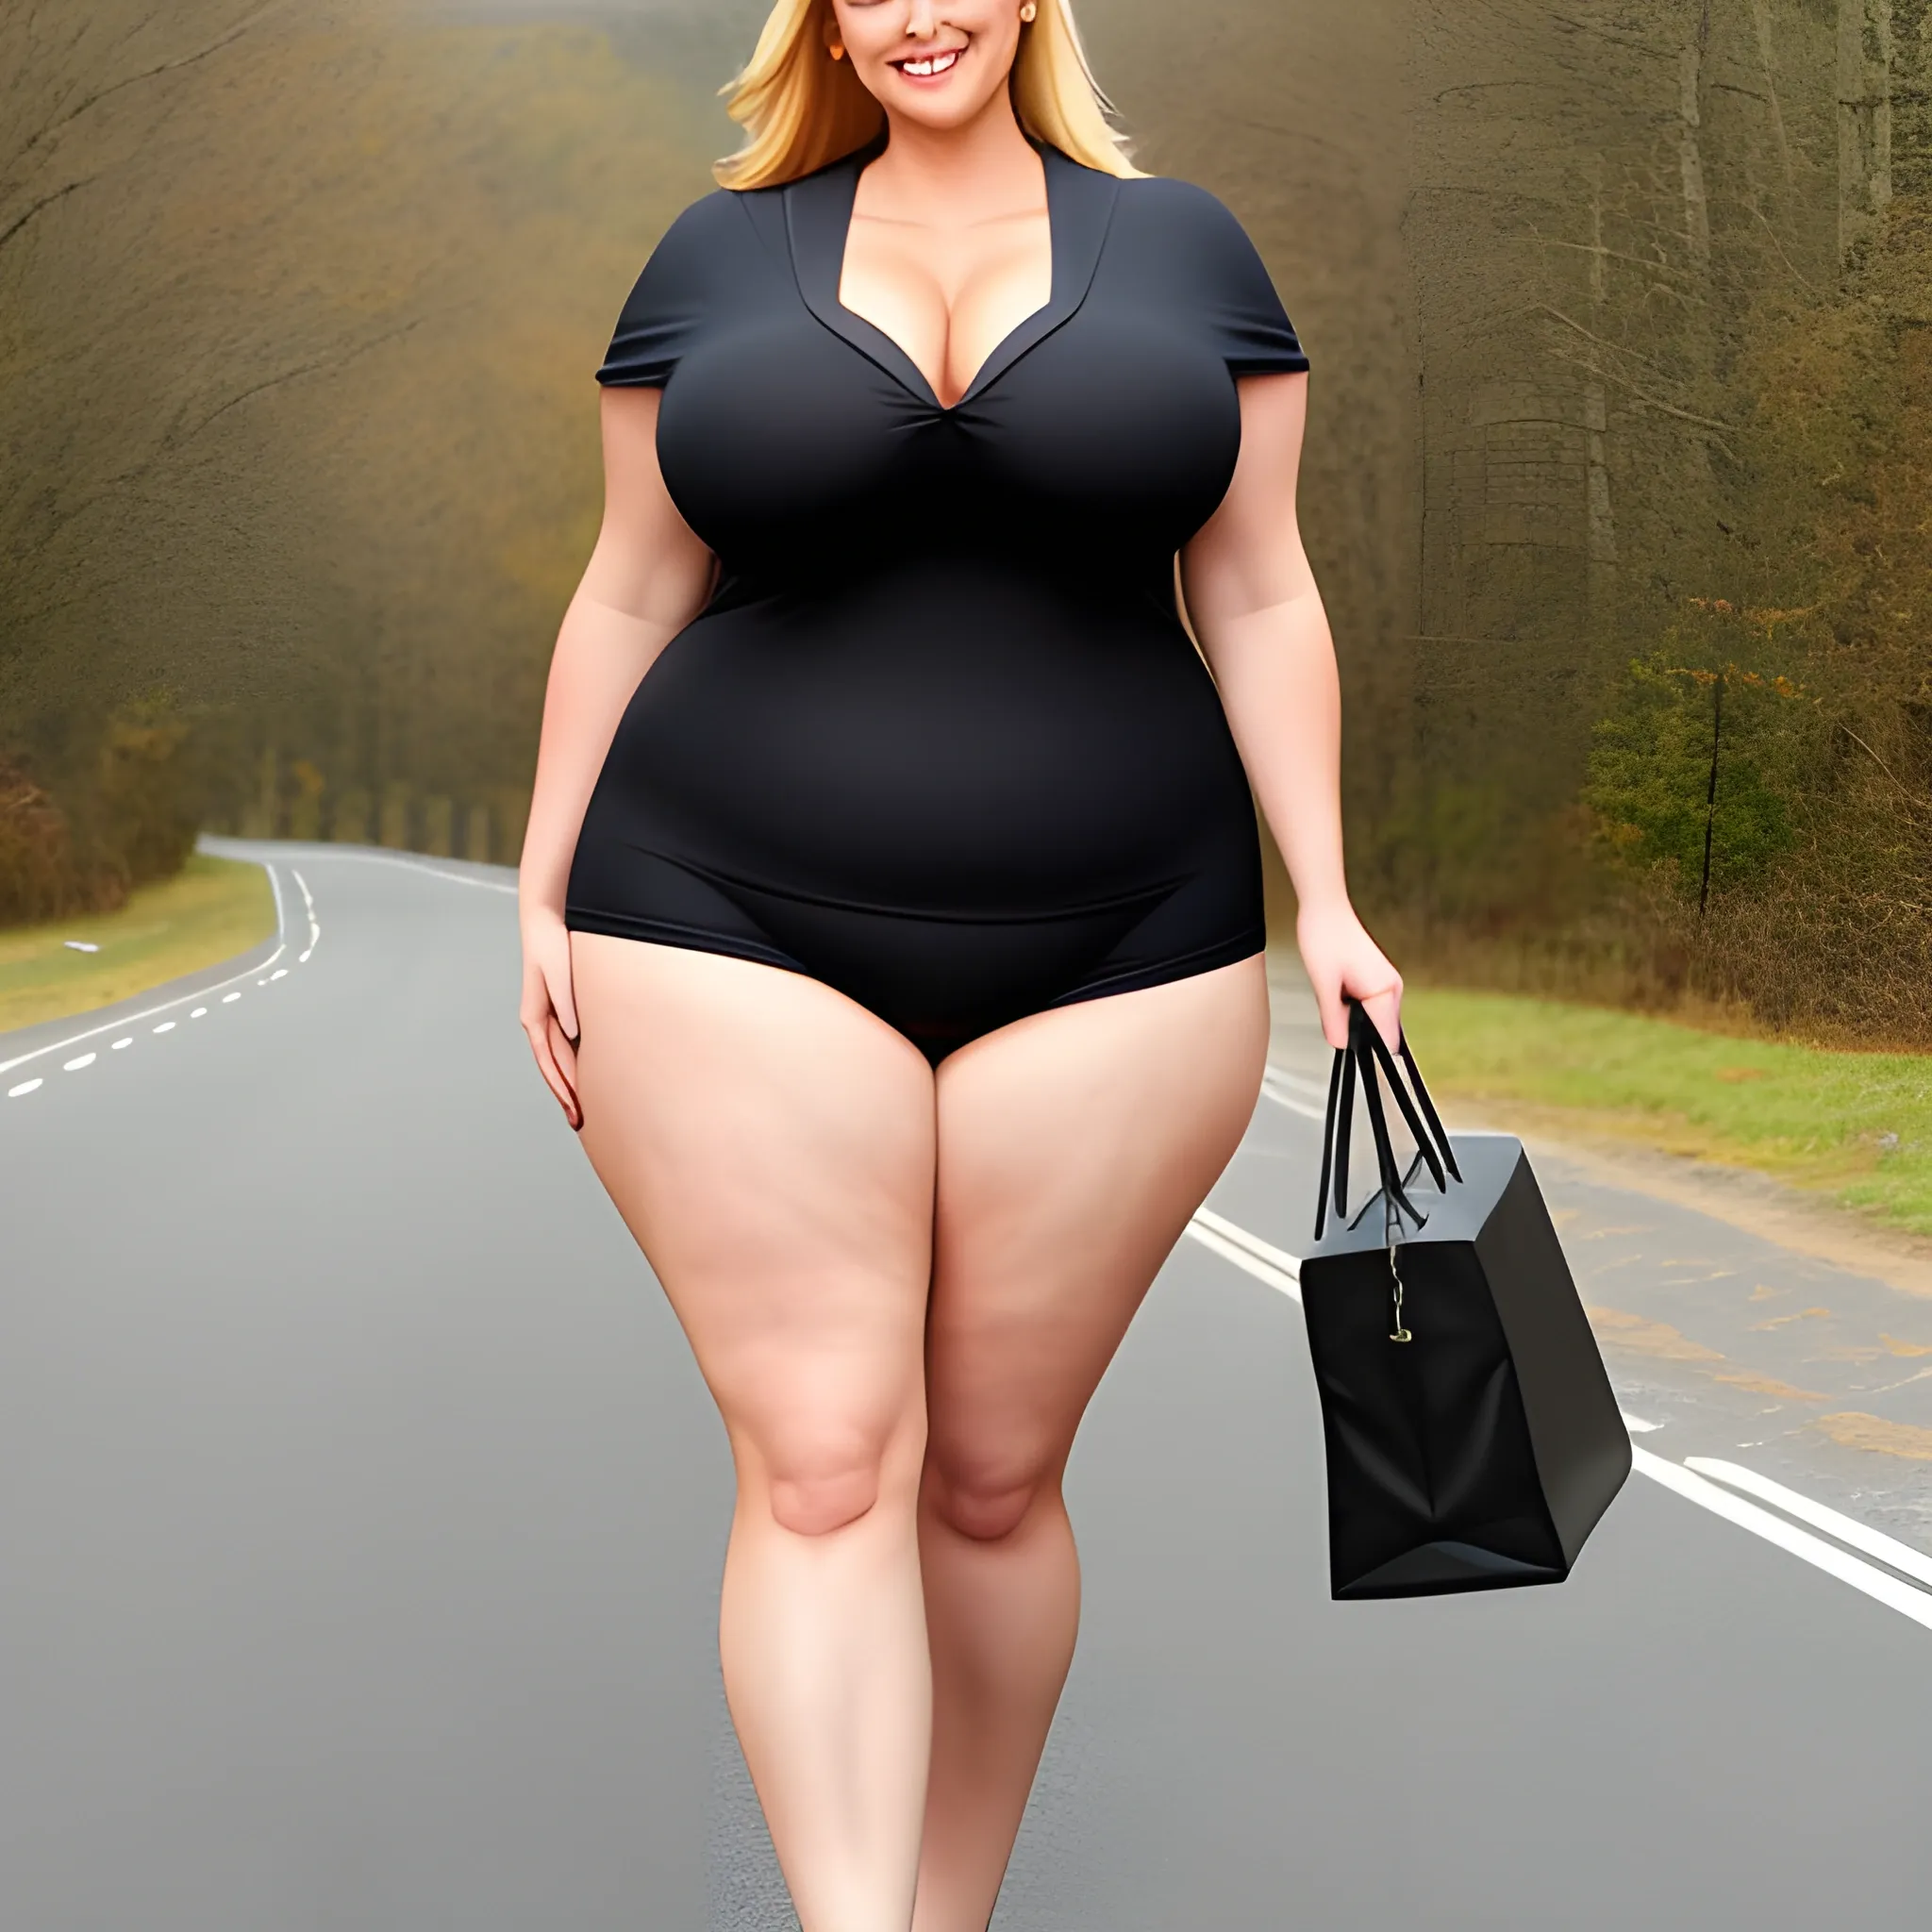 large and tall blonde plus size girl with small head, broad shou 